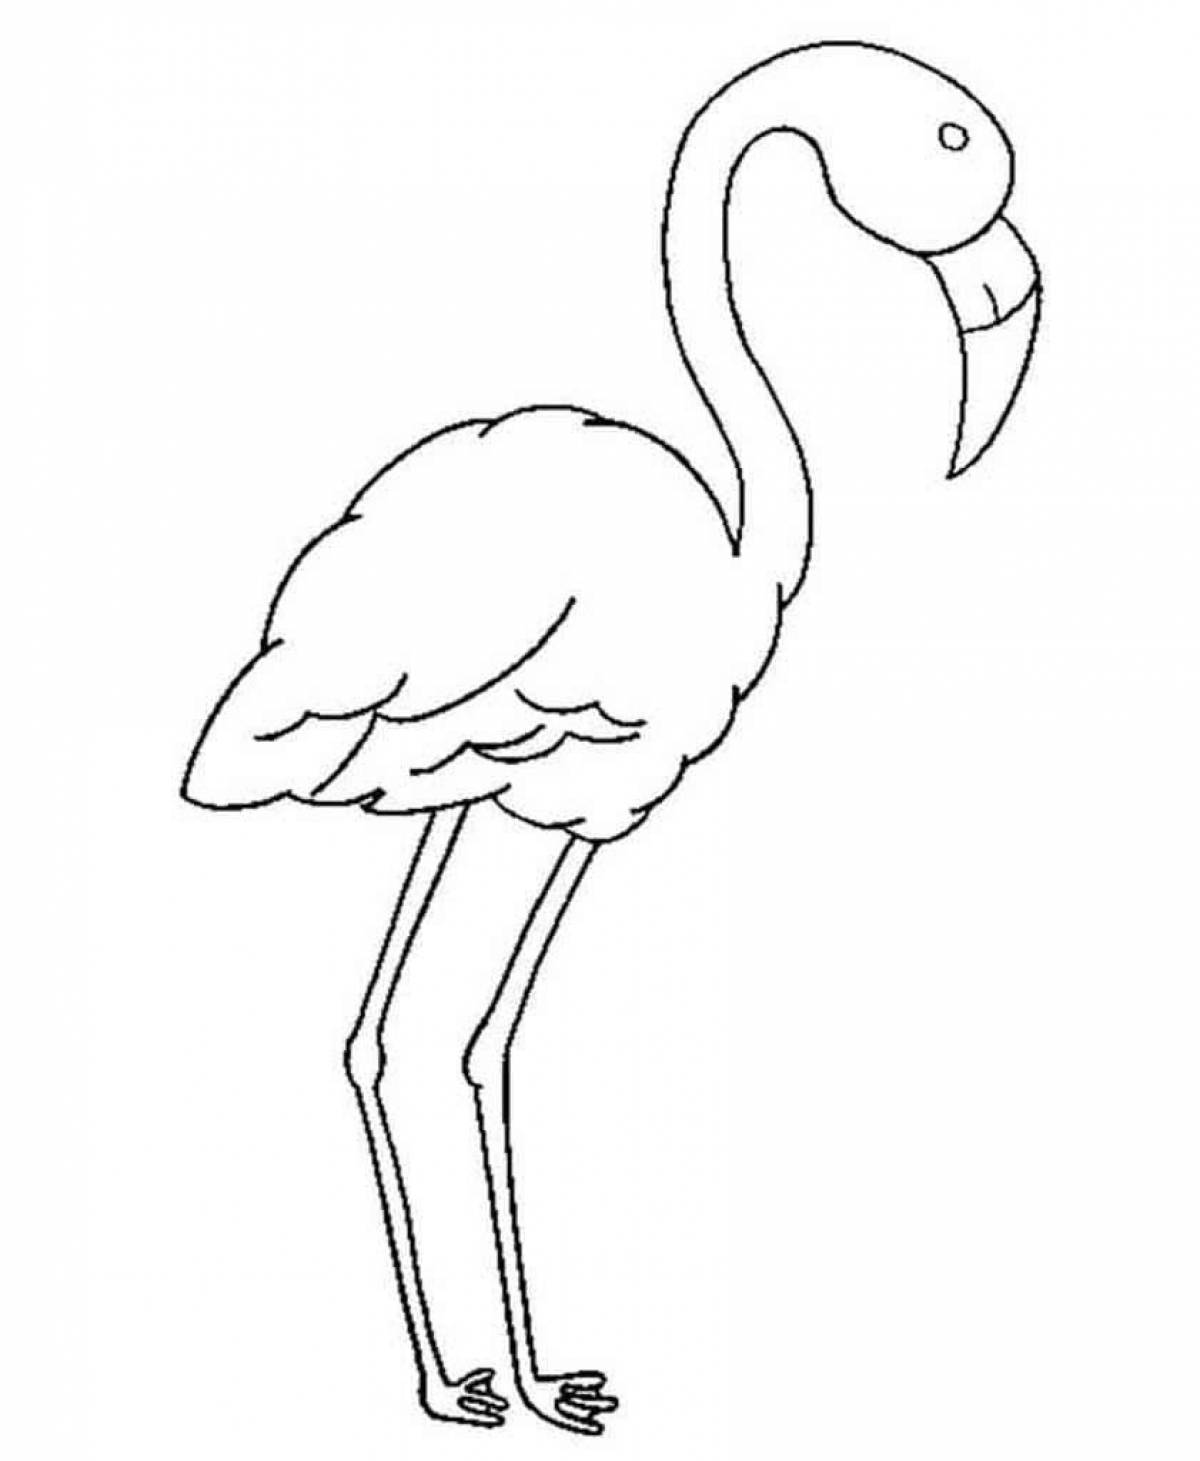 Colorful flamingo coloring pages for kids